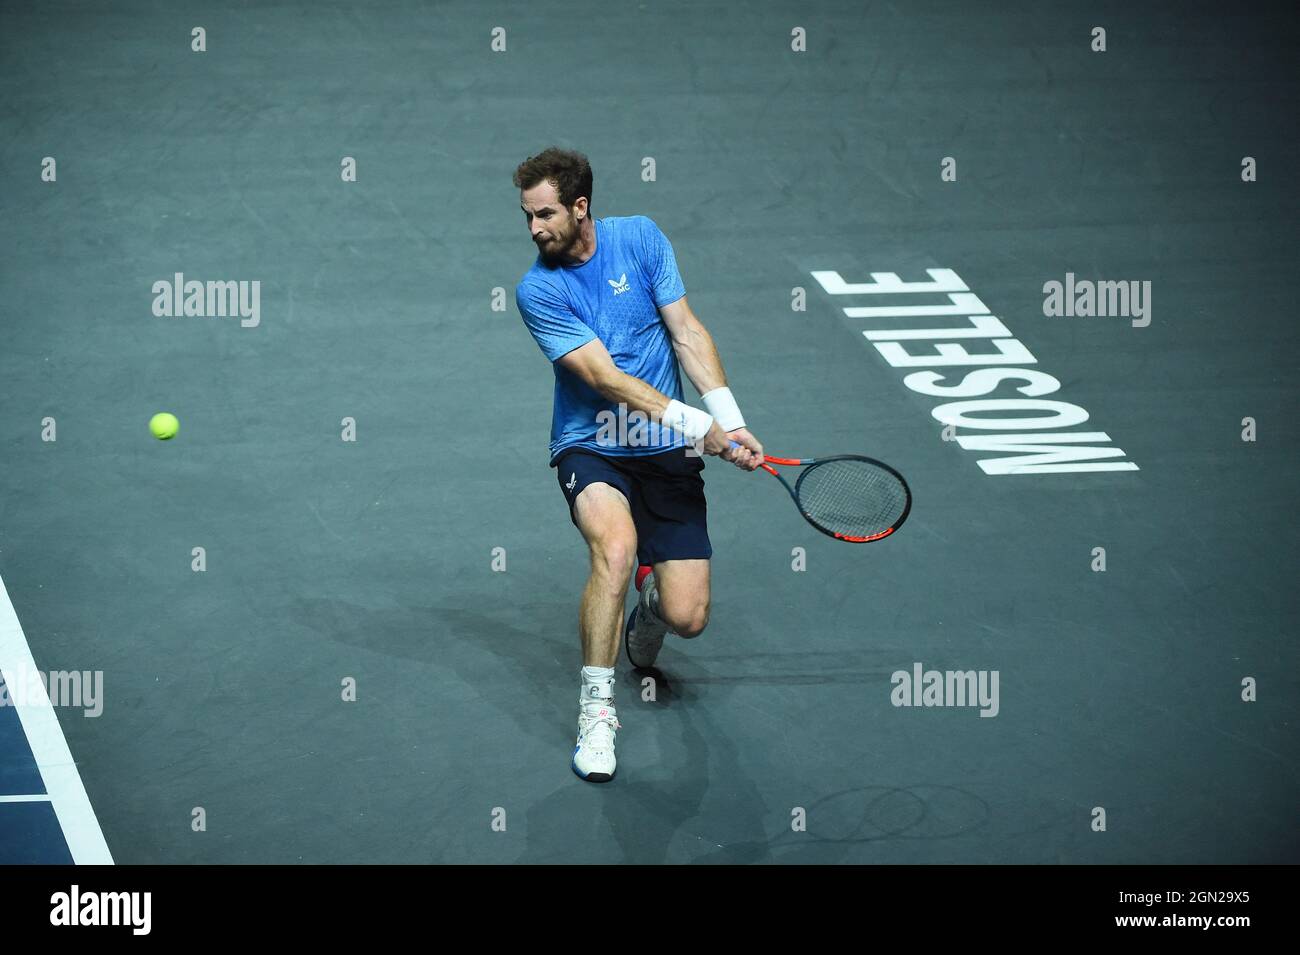 Metz, France, September 21, 2021. Andy Murray (GBR) during his first round match at the Moselle Open at Les Arenas de Metz, Metz, FRANCE, on September 21, 2021. Photo by Corinne Dubreuil/ABACAPRESS.COM Stock Photo